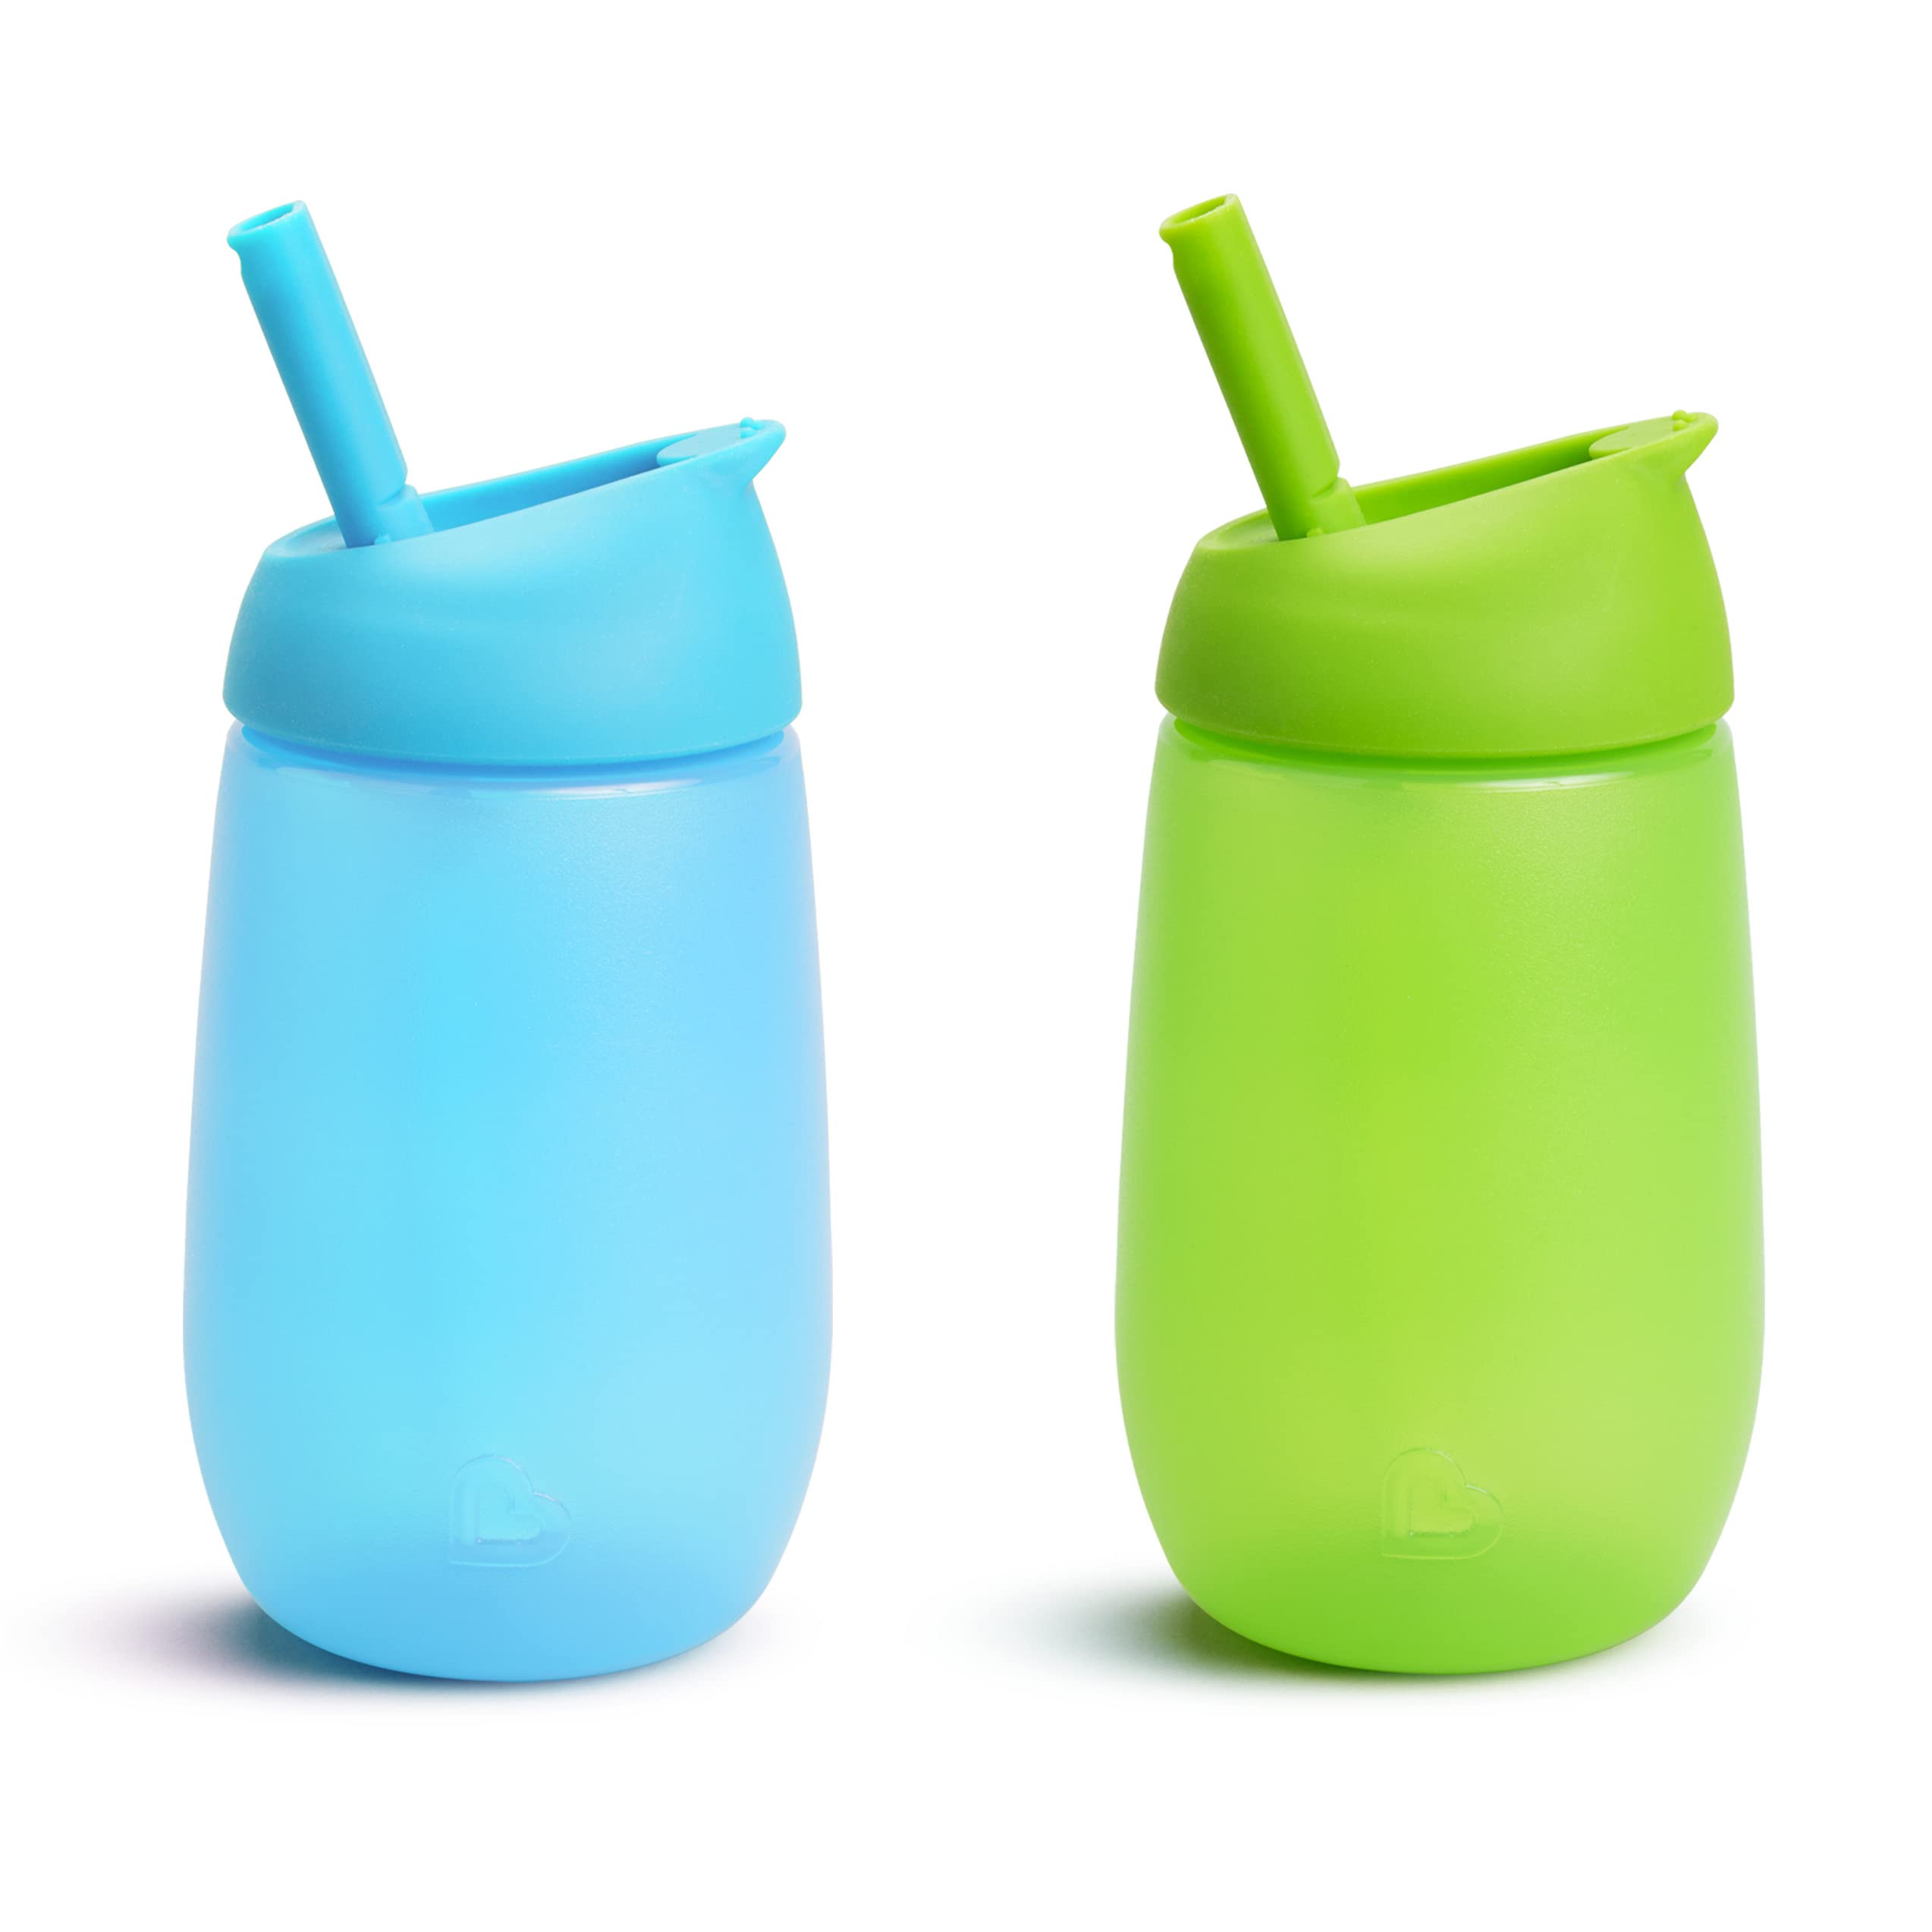 Munchkin Simple Clean Toddler Straw Cup 10 Ounce 2 Count (Pack of 1)  Blue/Green 2pk Blue/Green